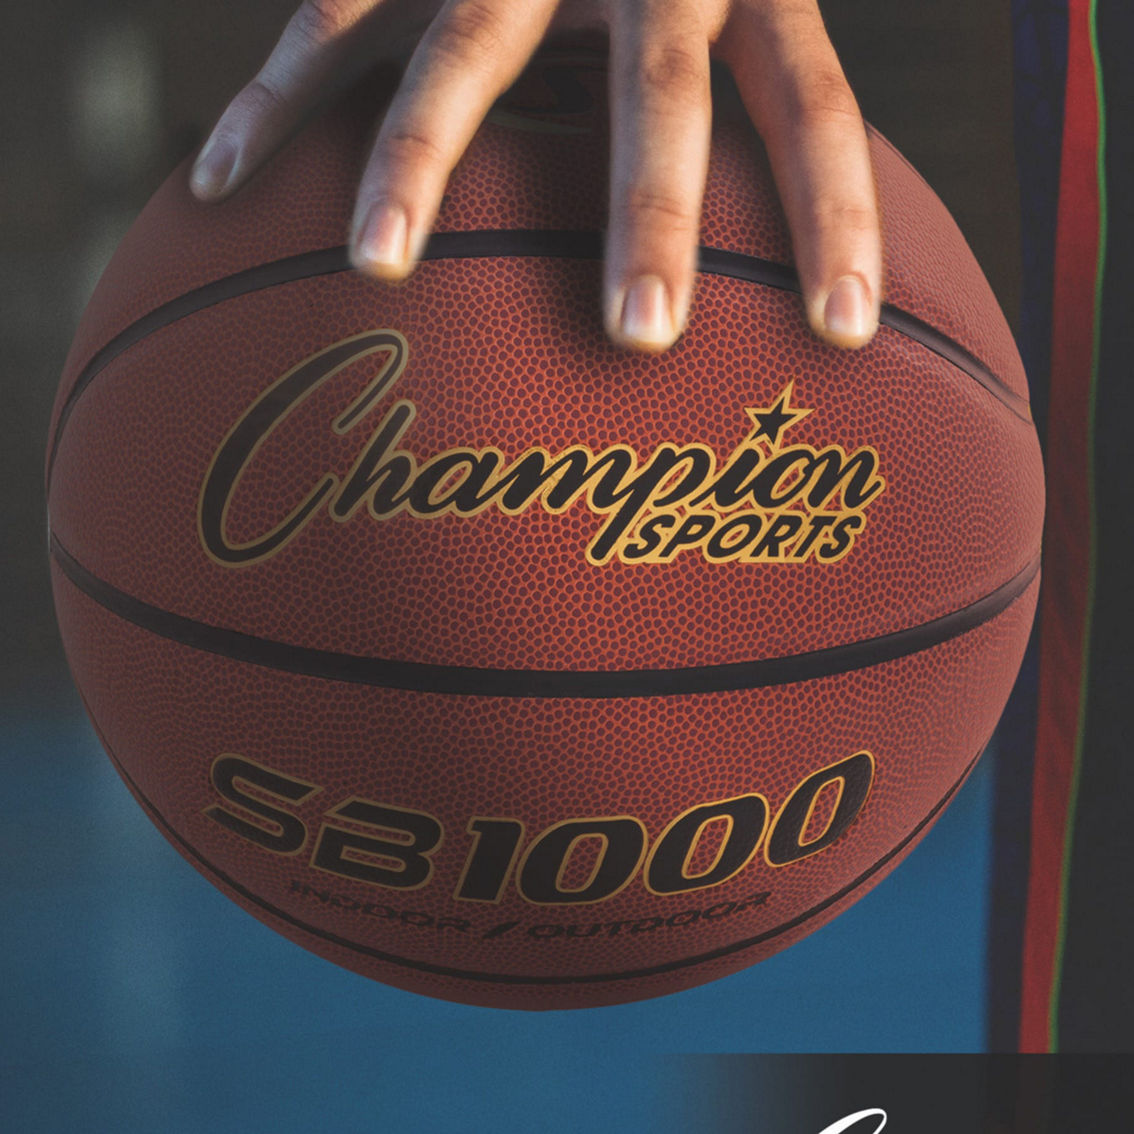 Champion Sports Cordley® Official Size Composite Basketball - Image 3 of 4